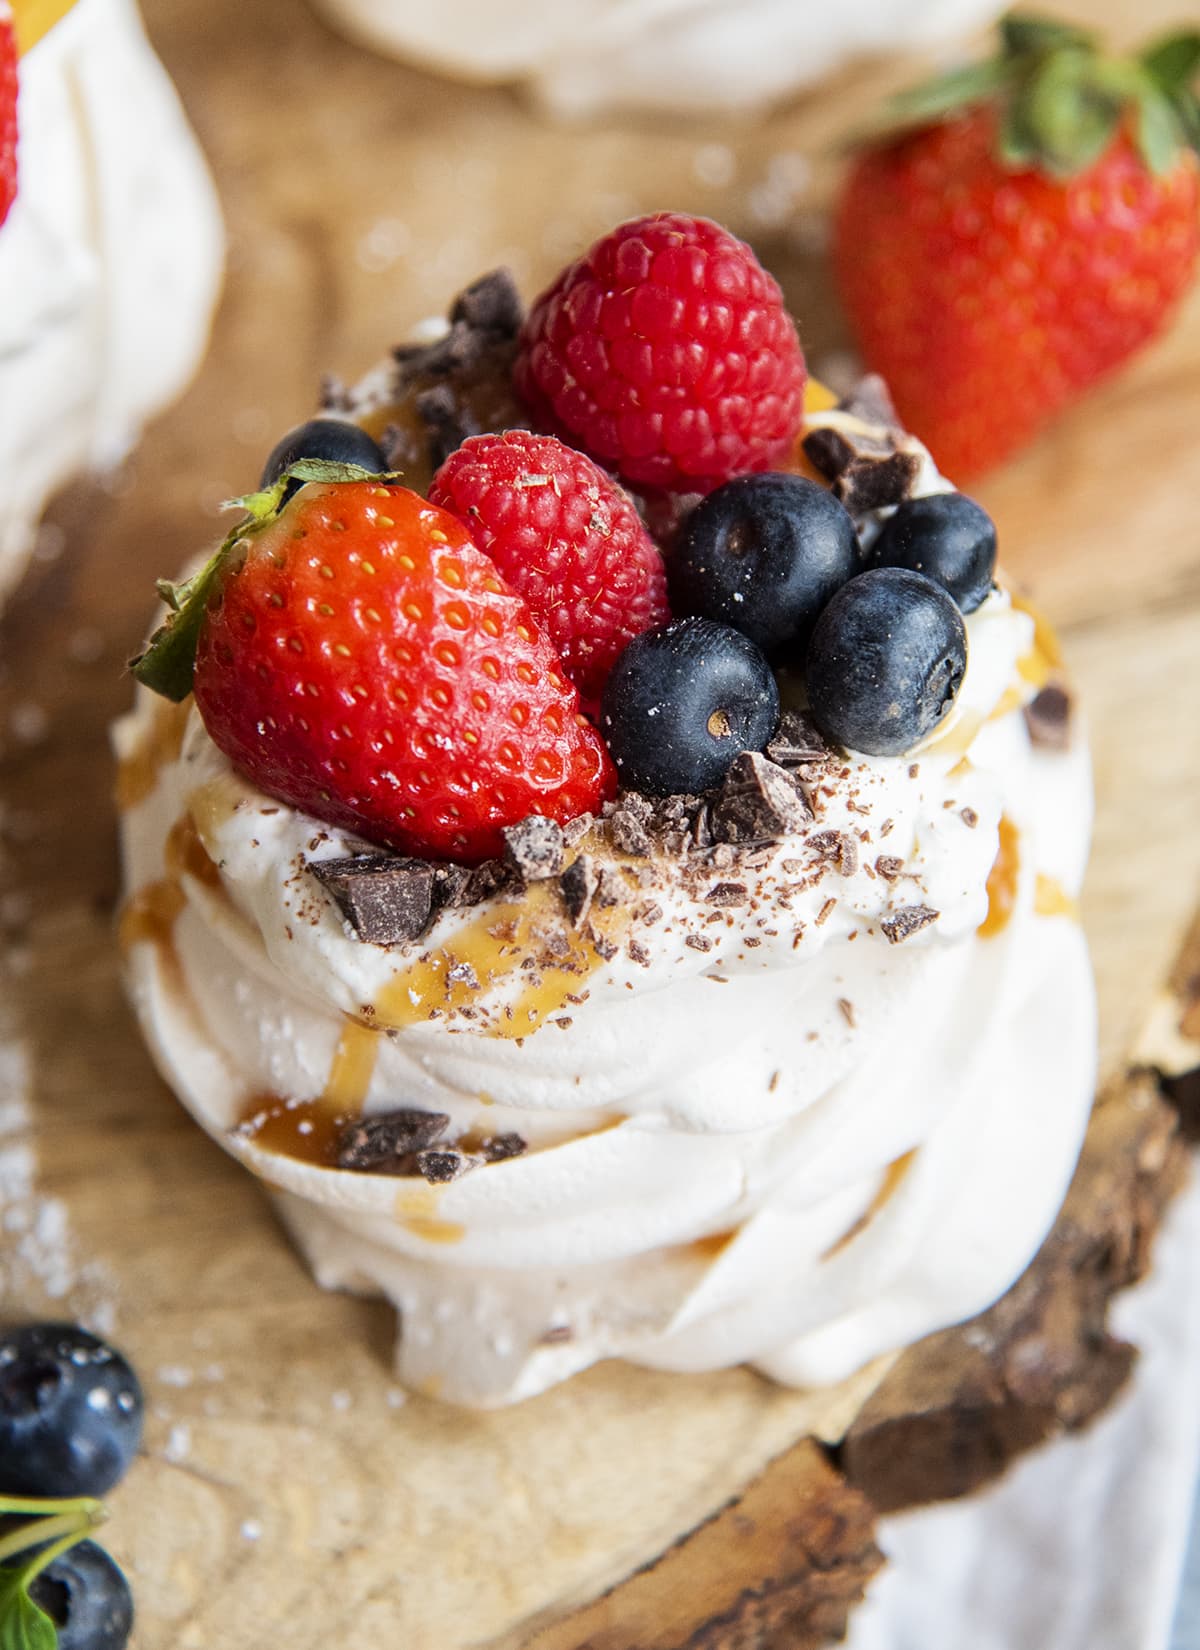 A close up of a mini pavlova topped with strawberries , blueberries, raspberries, and chocolate shavings.